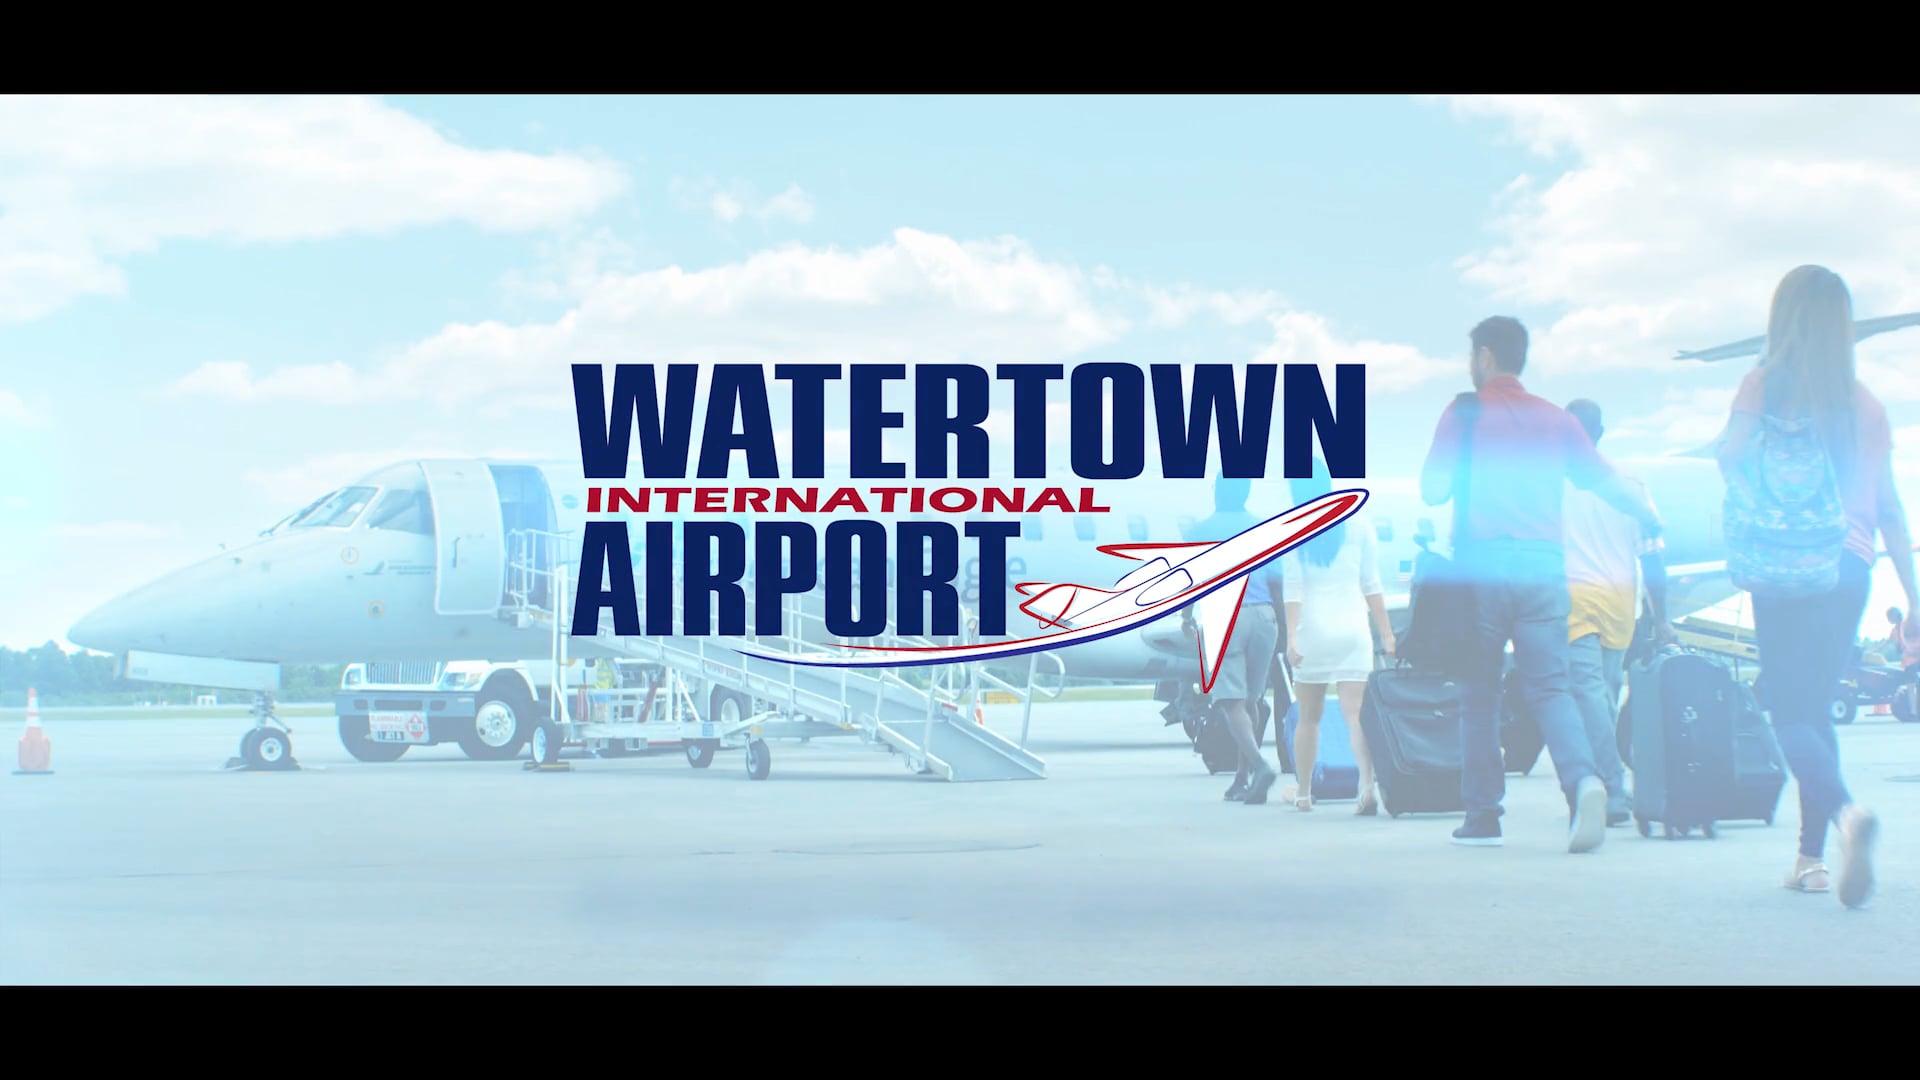 Watertown International Airport - Your Gateway to the World